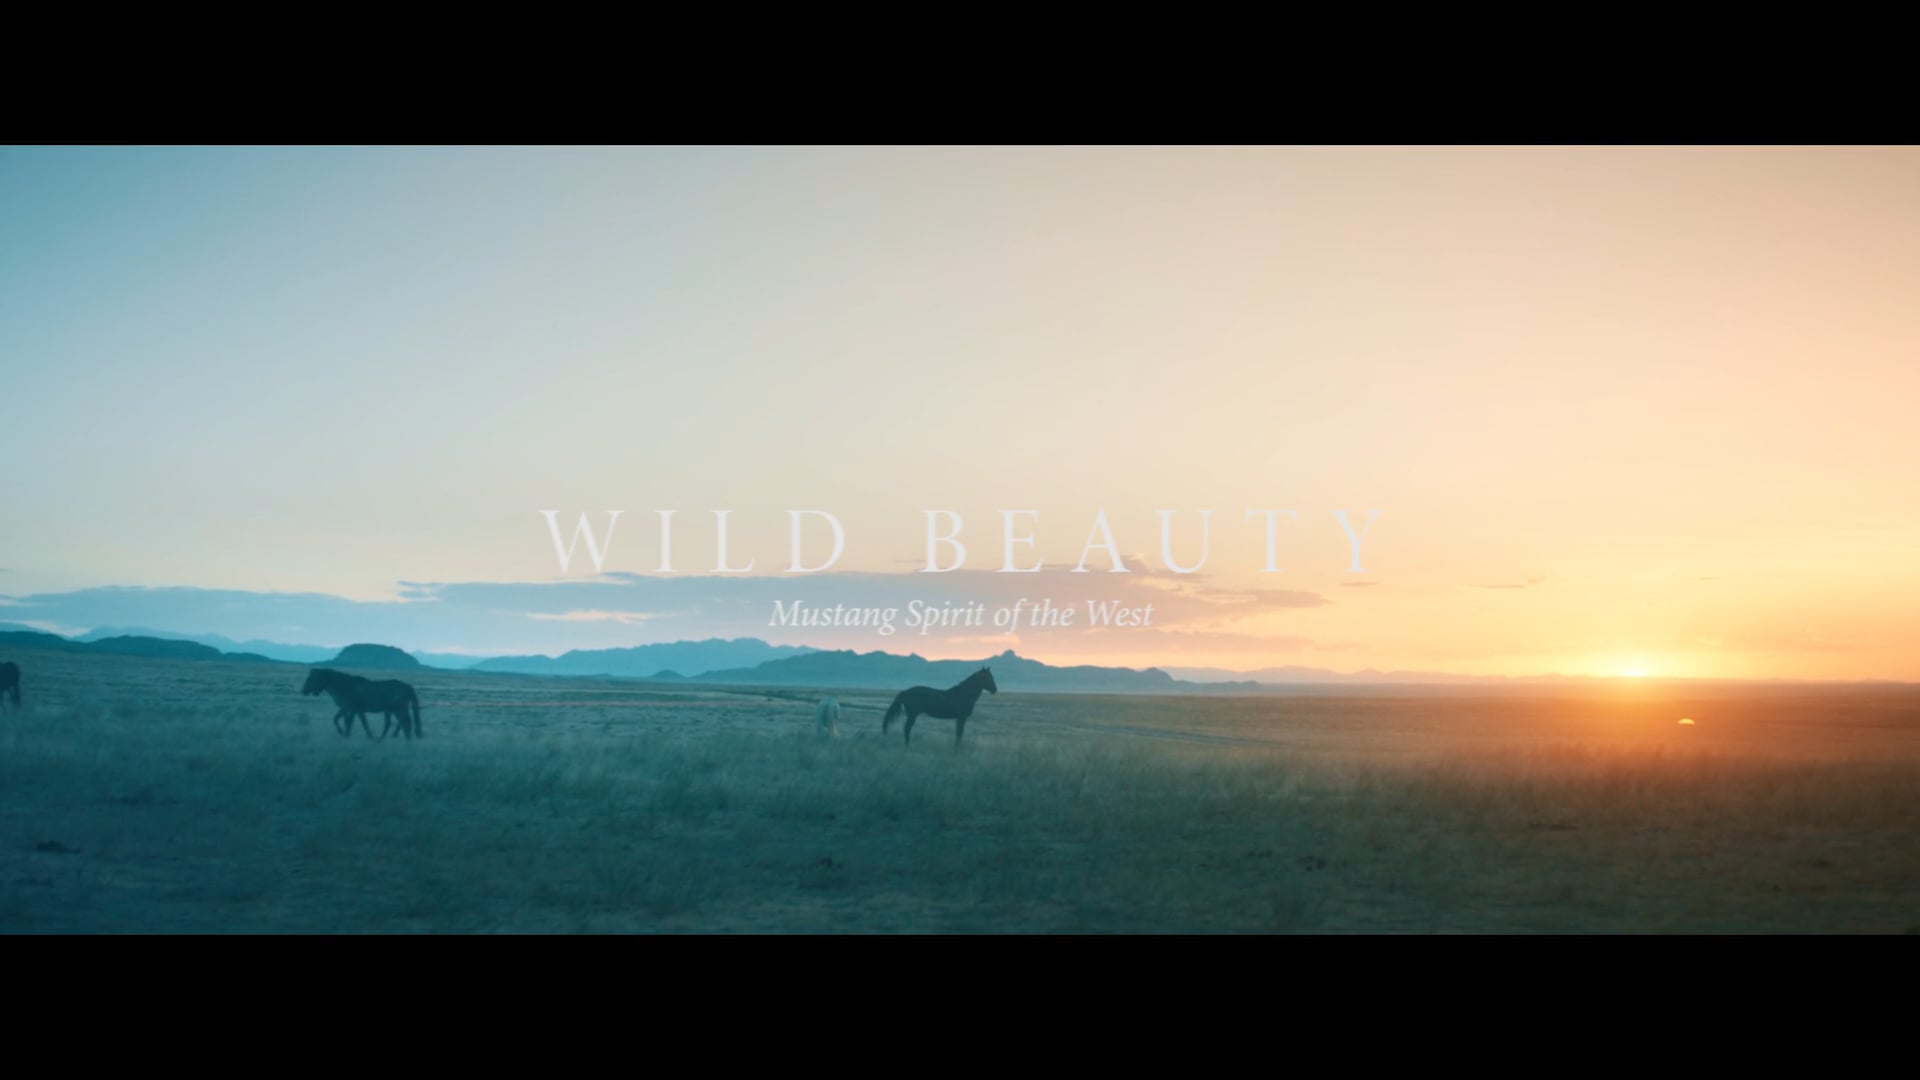 Wild Beauty:  Mustang Spirit of the West (Official Teaser)